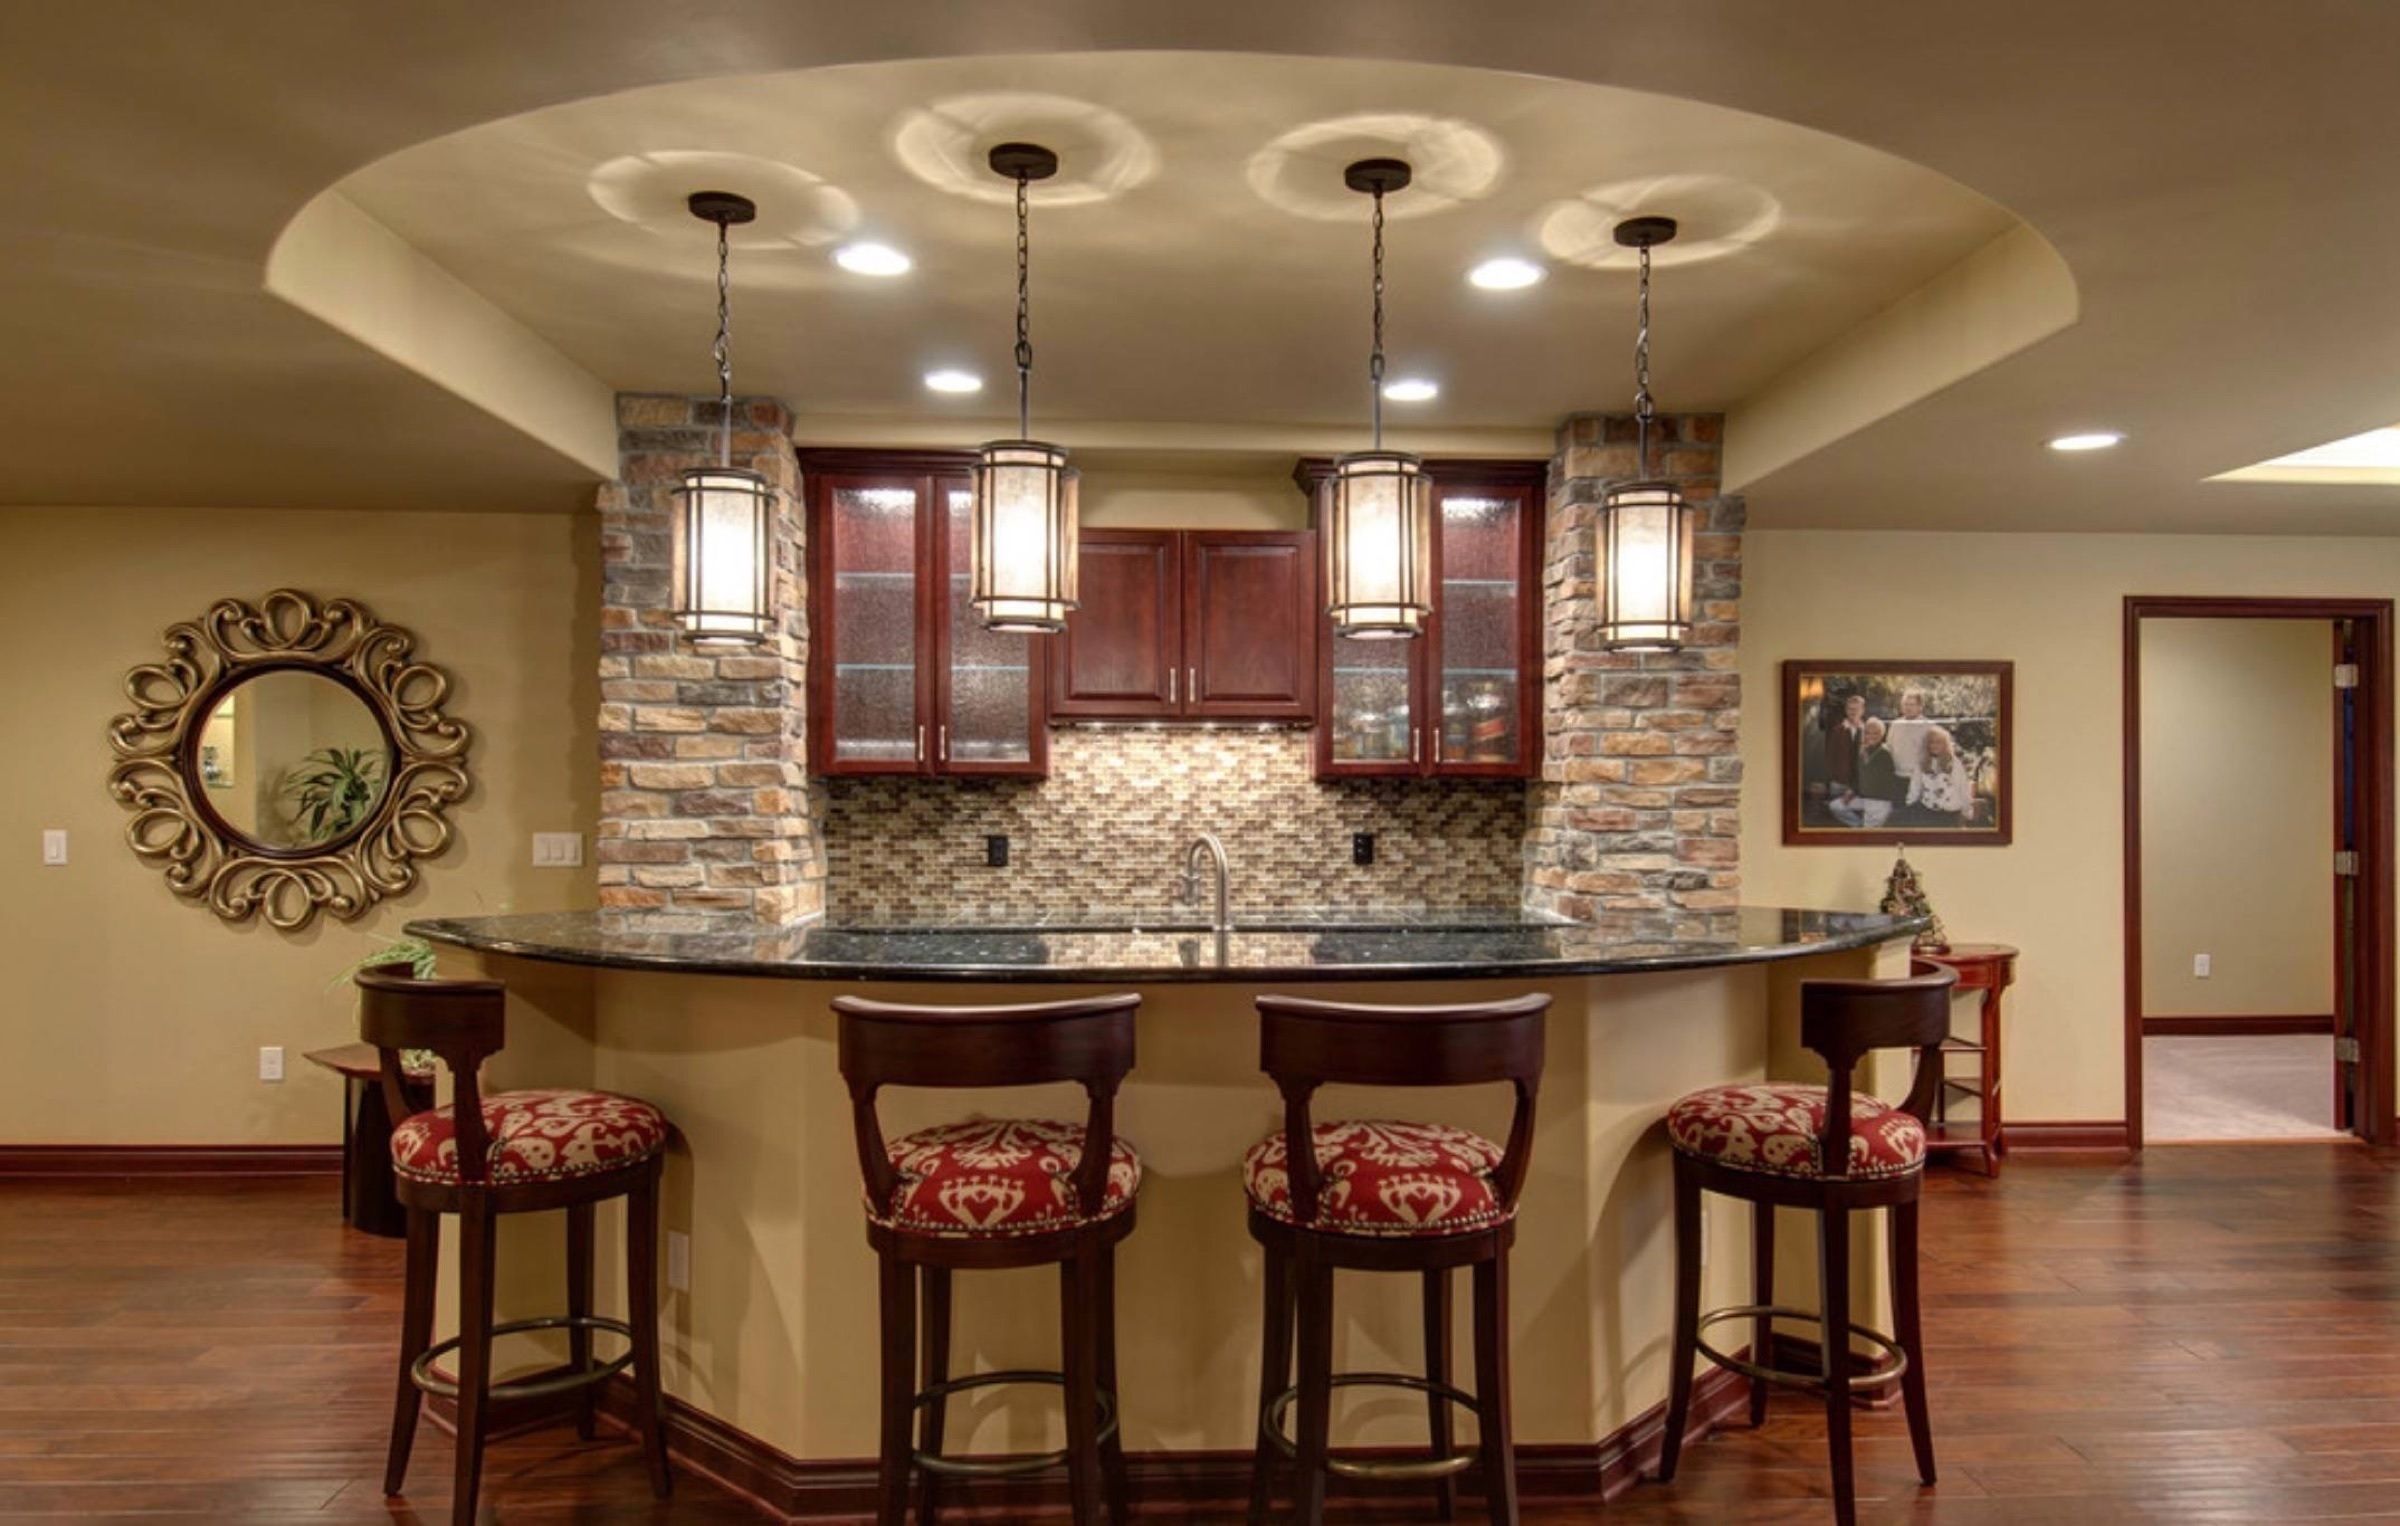 Half-tray rounded ceiling design showcasing a lovely basement kitchen